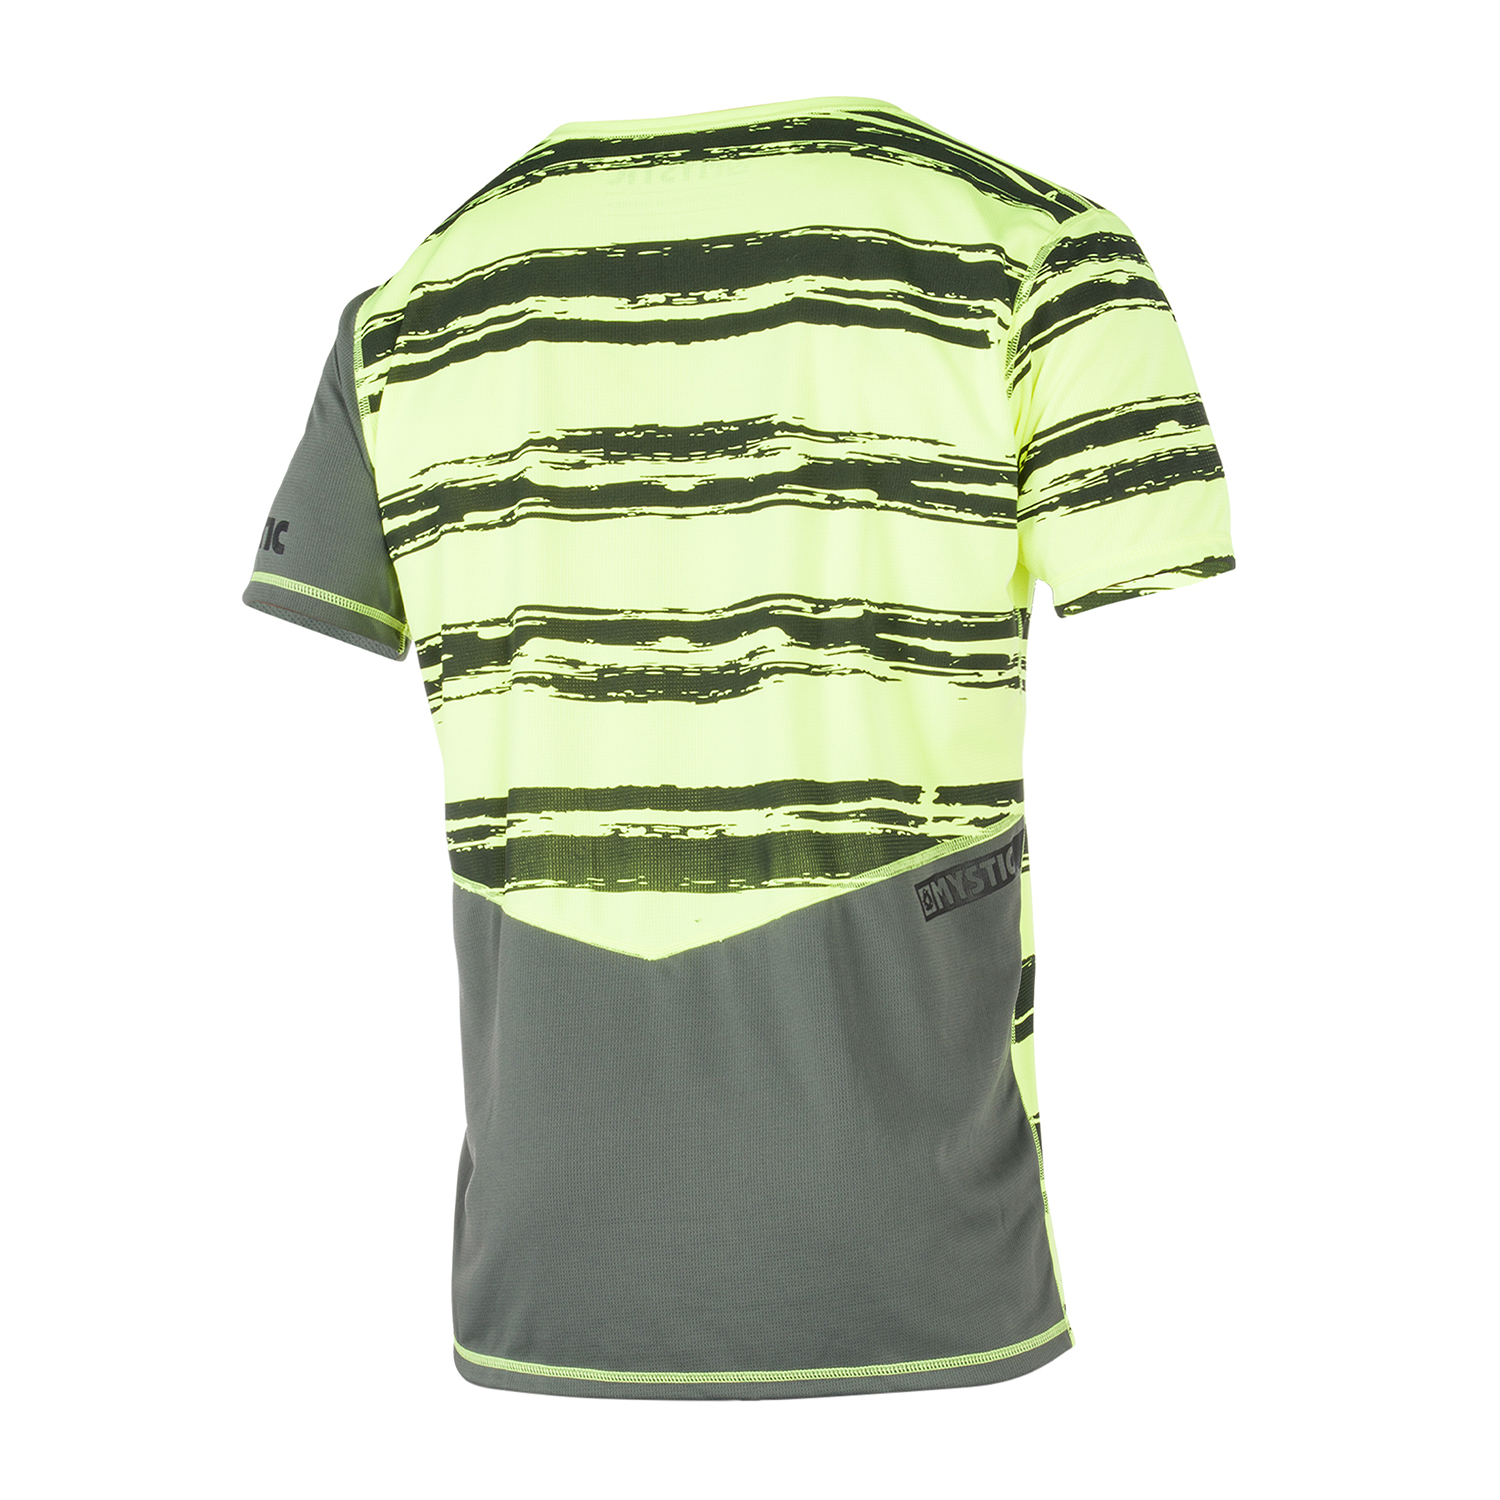 Lime Details about   Mystic Majestic Shortsleeve Quickdry 2021 